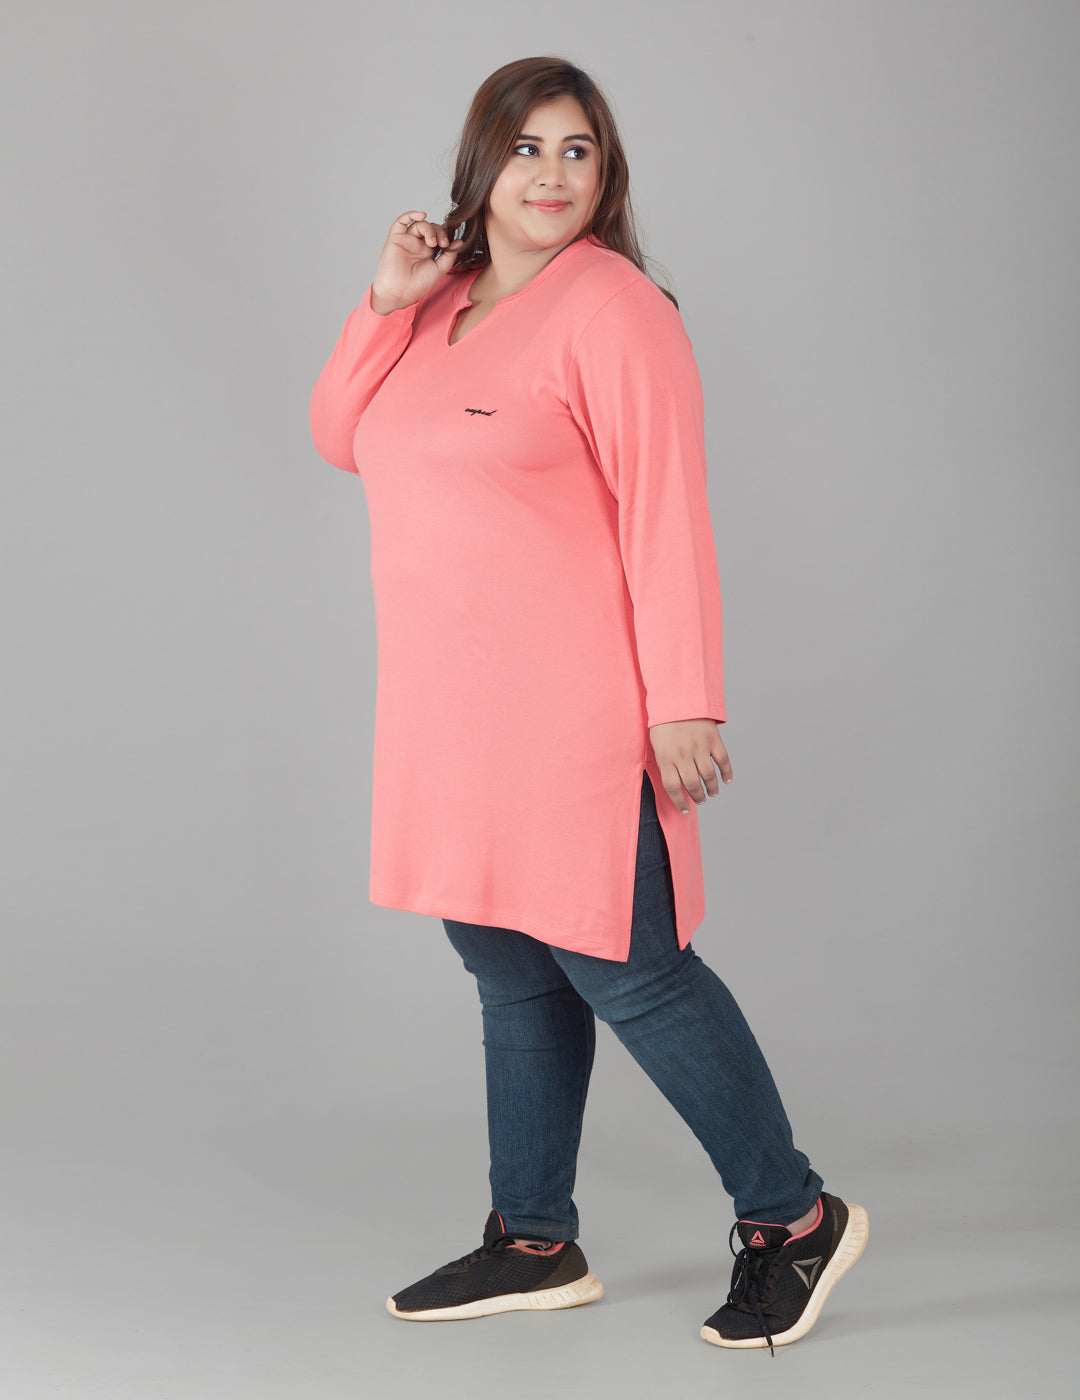 Plus Size Full Sleeves Long Tops For Women - Pack of 2 (Pink & Blue)